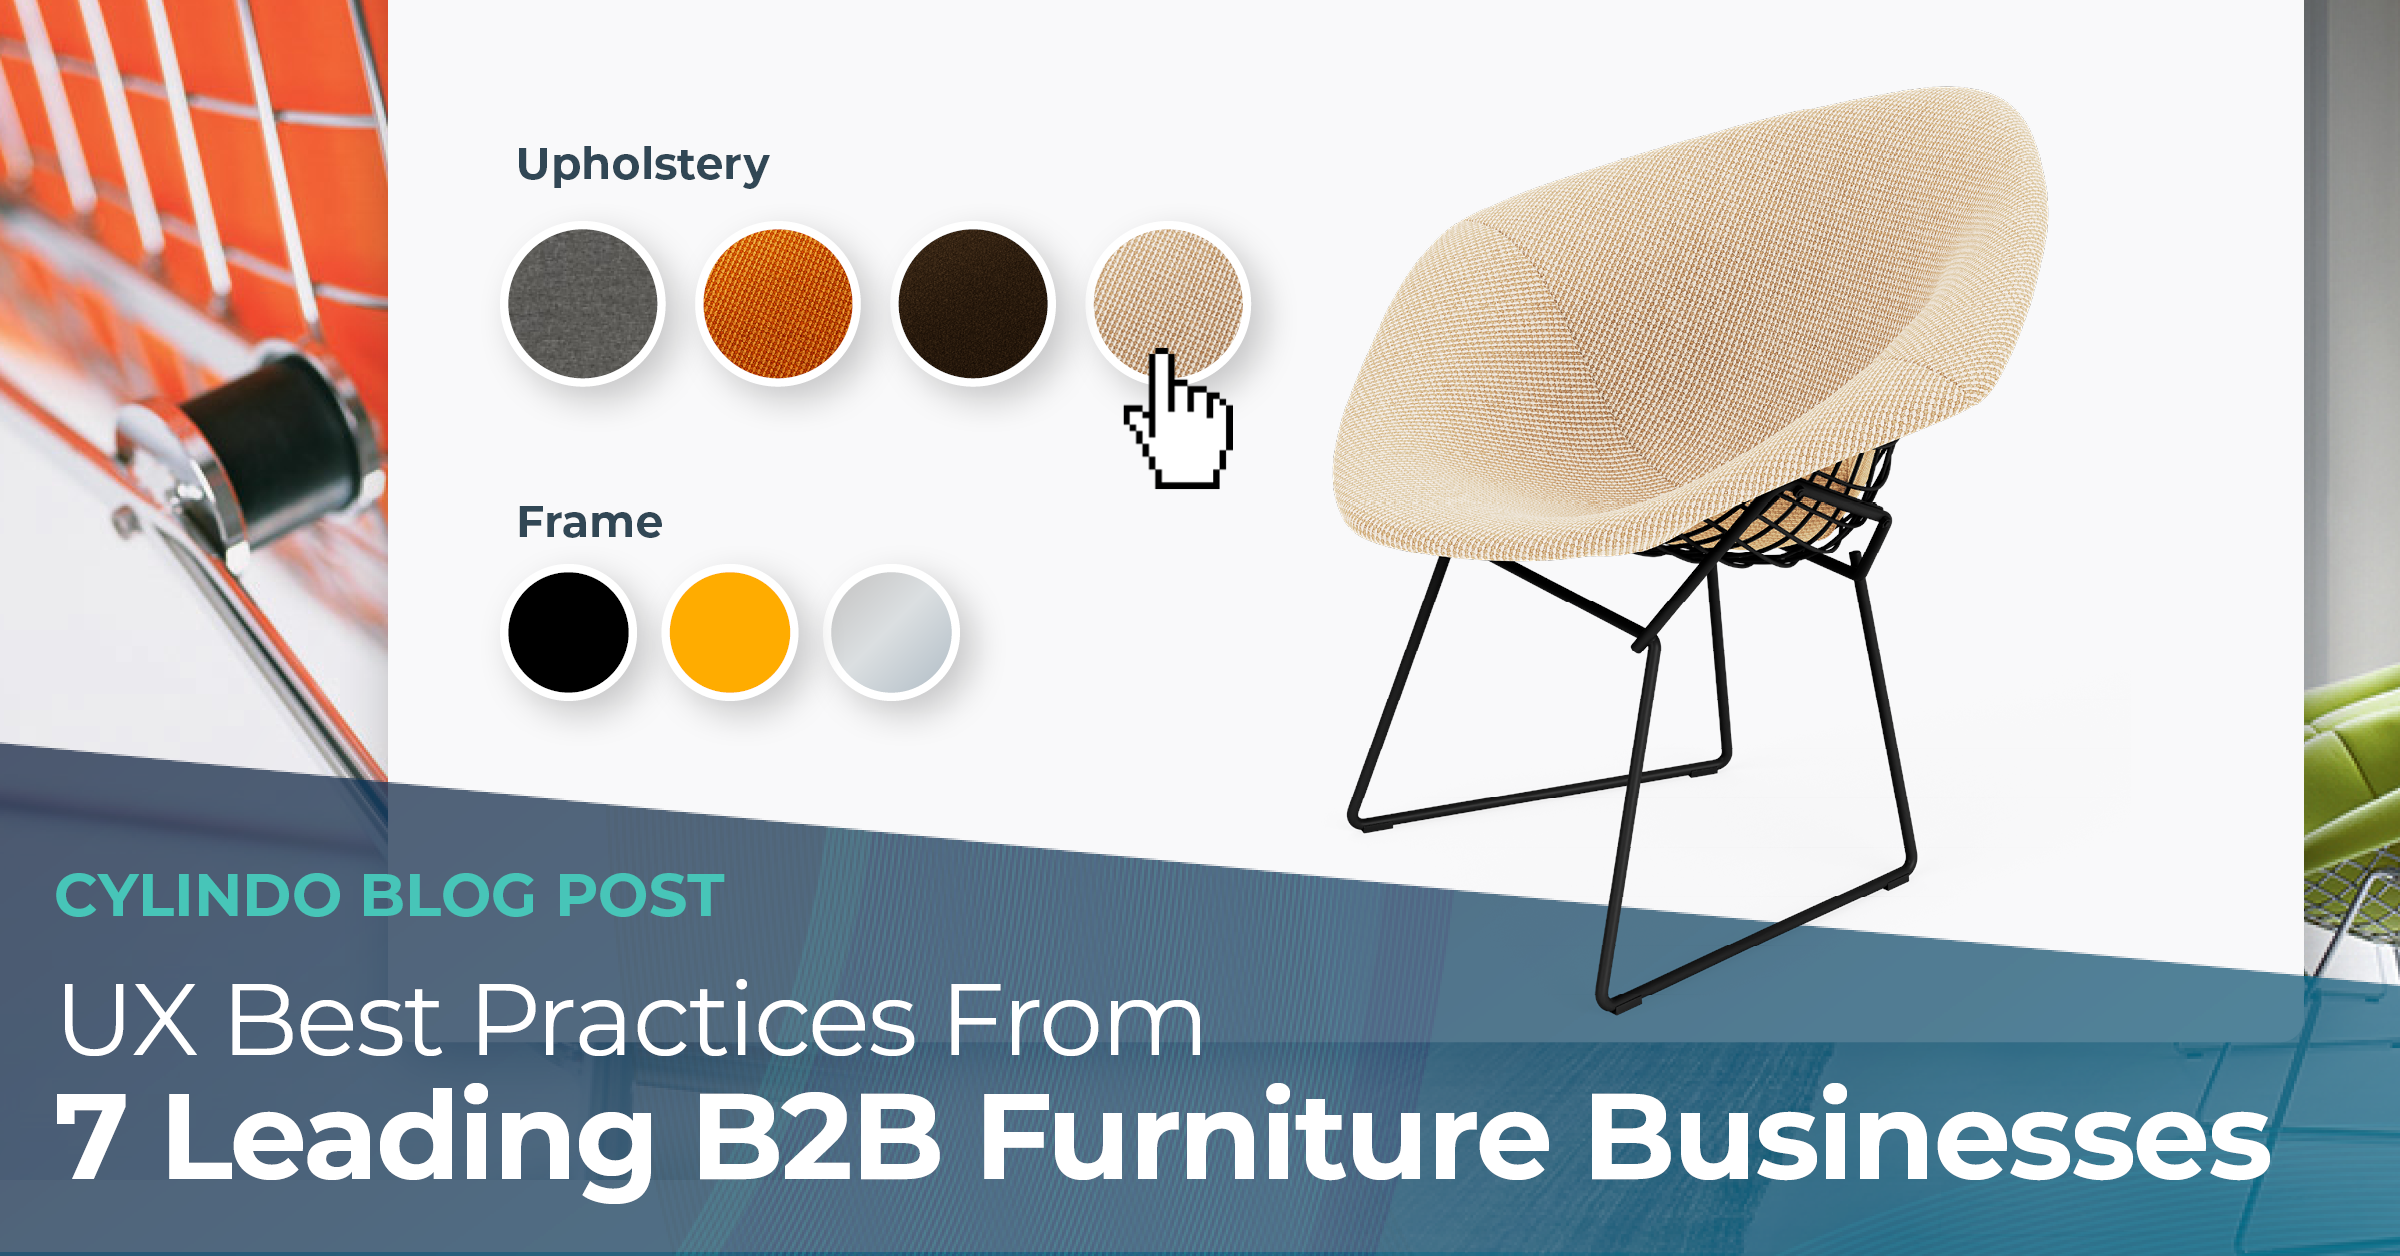 UX Best Practices From 7 Leading B2B Furniture Businesses